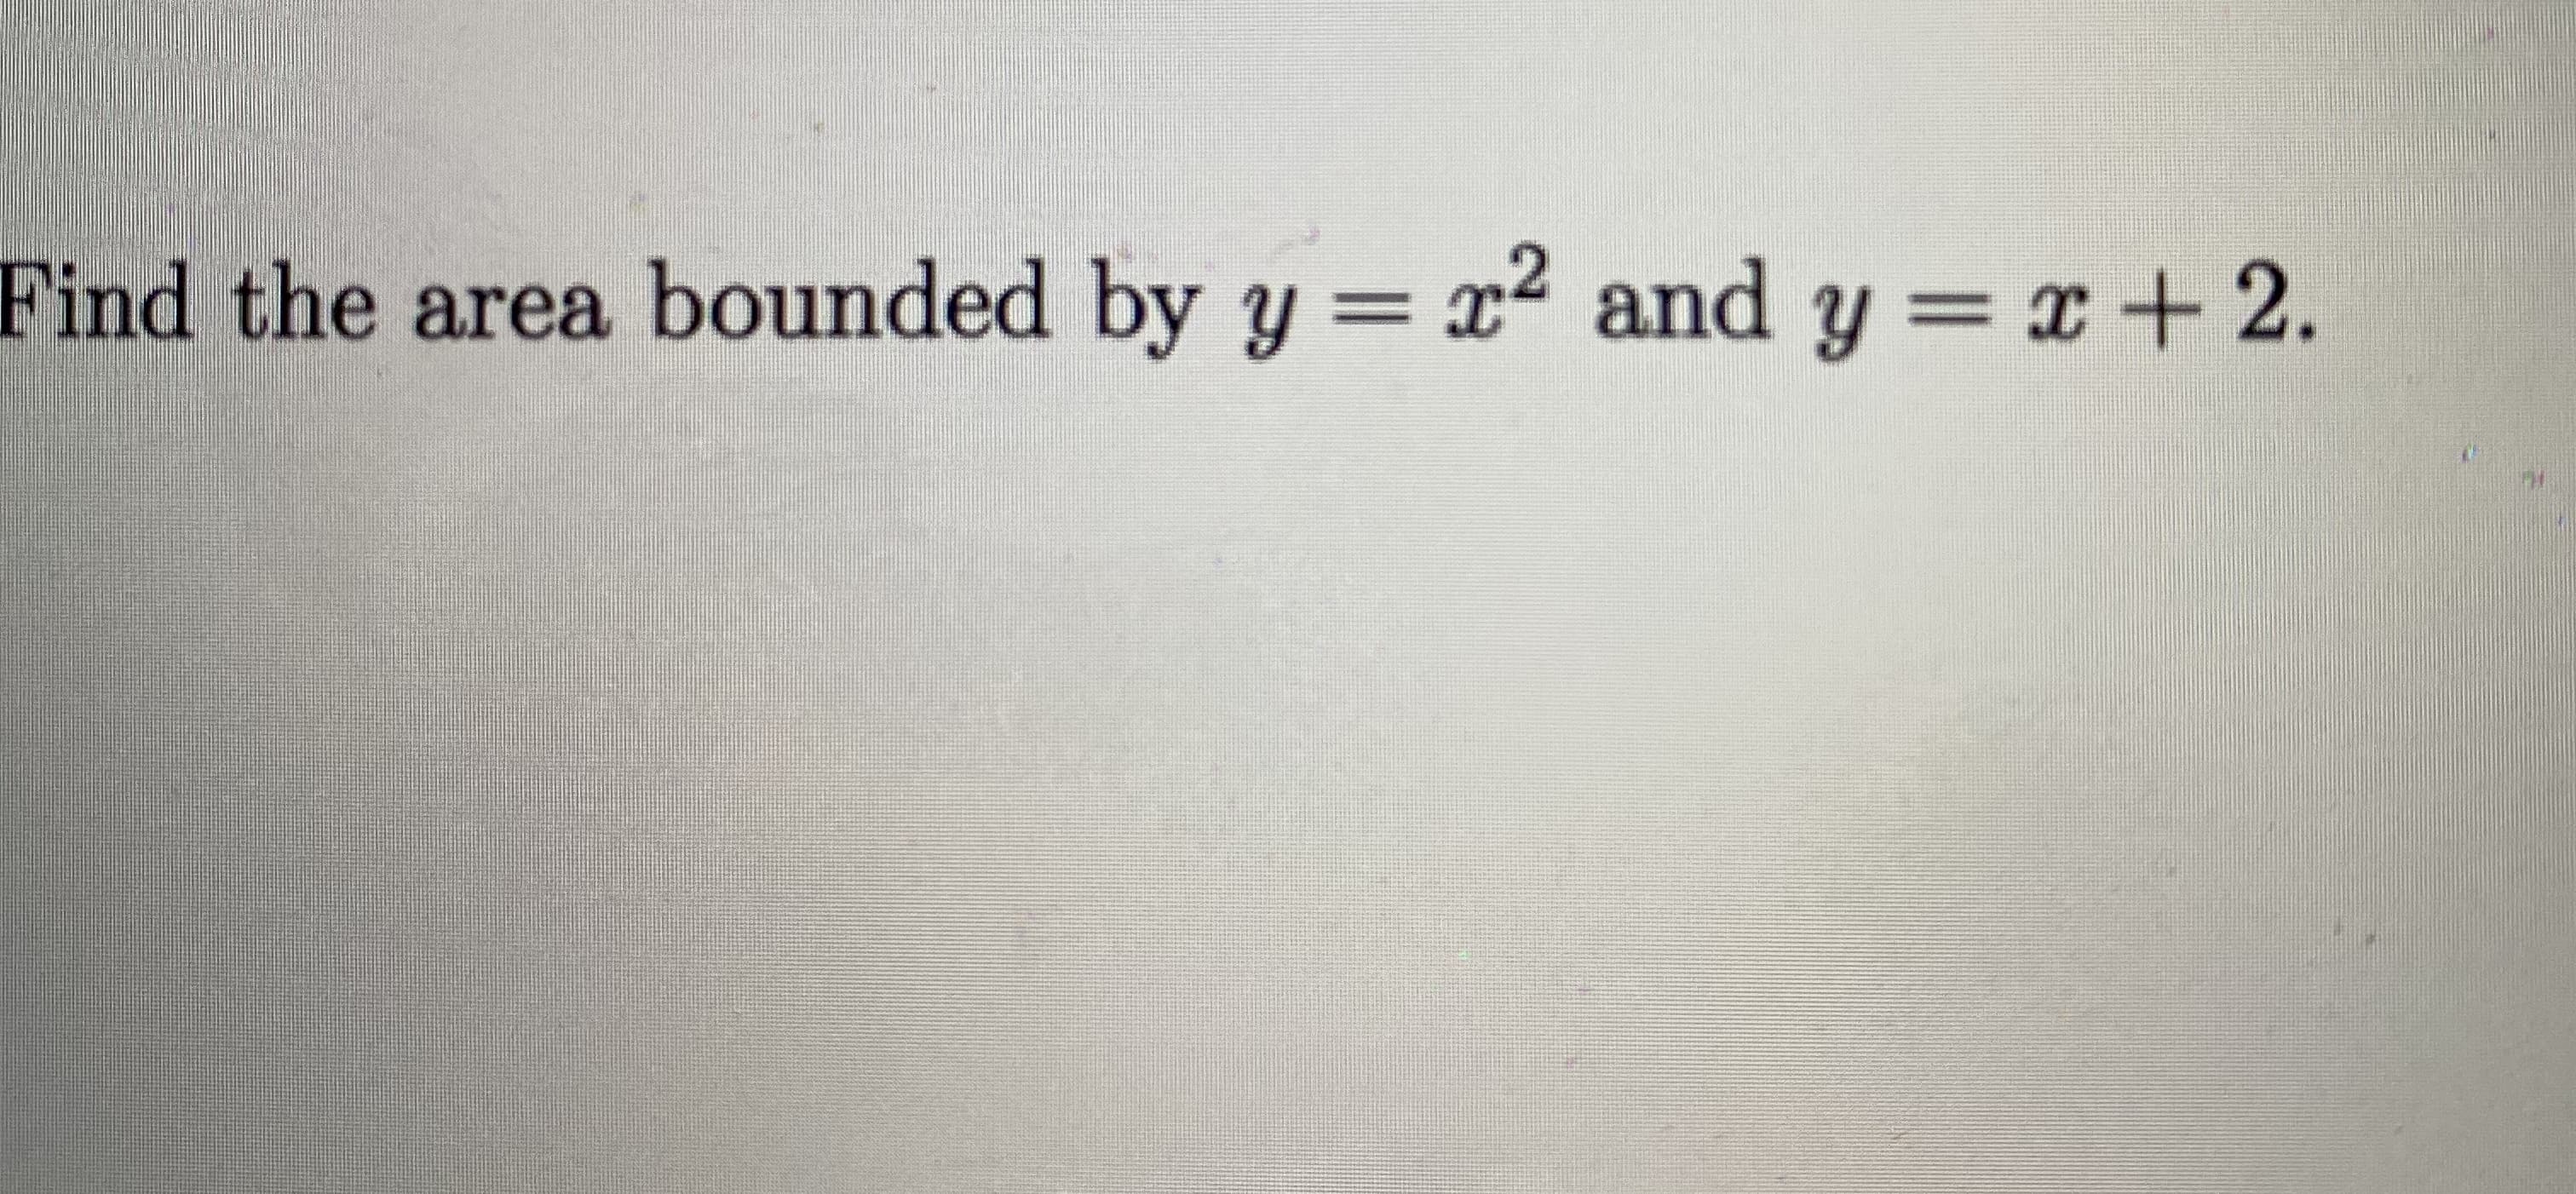 Find the area bounded by y = x2 and y = x+2.
